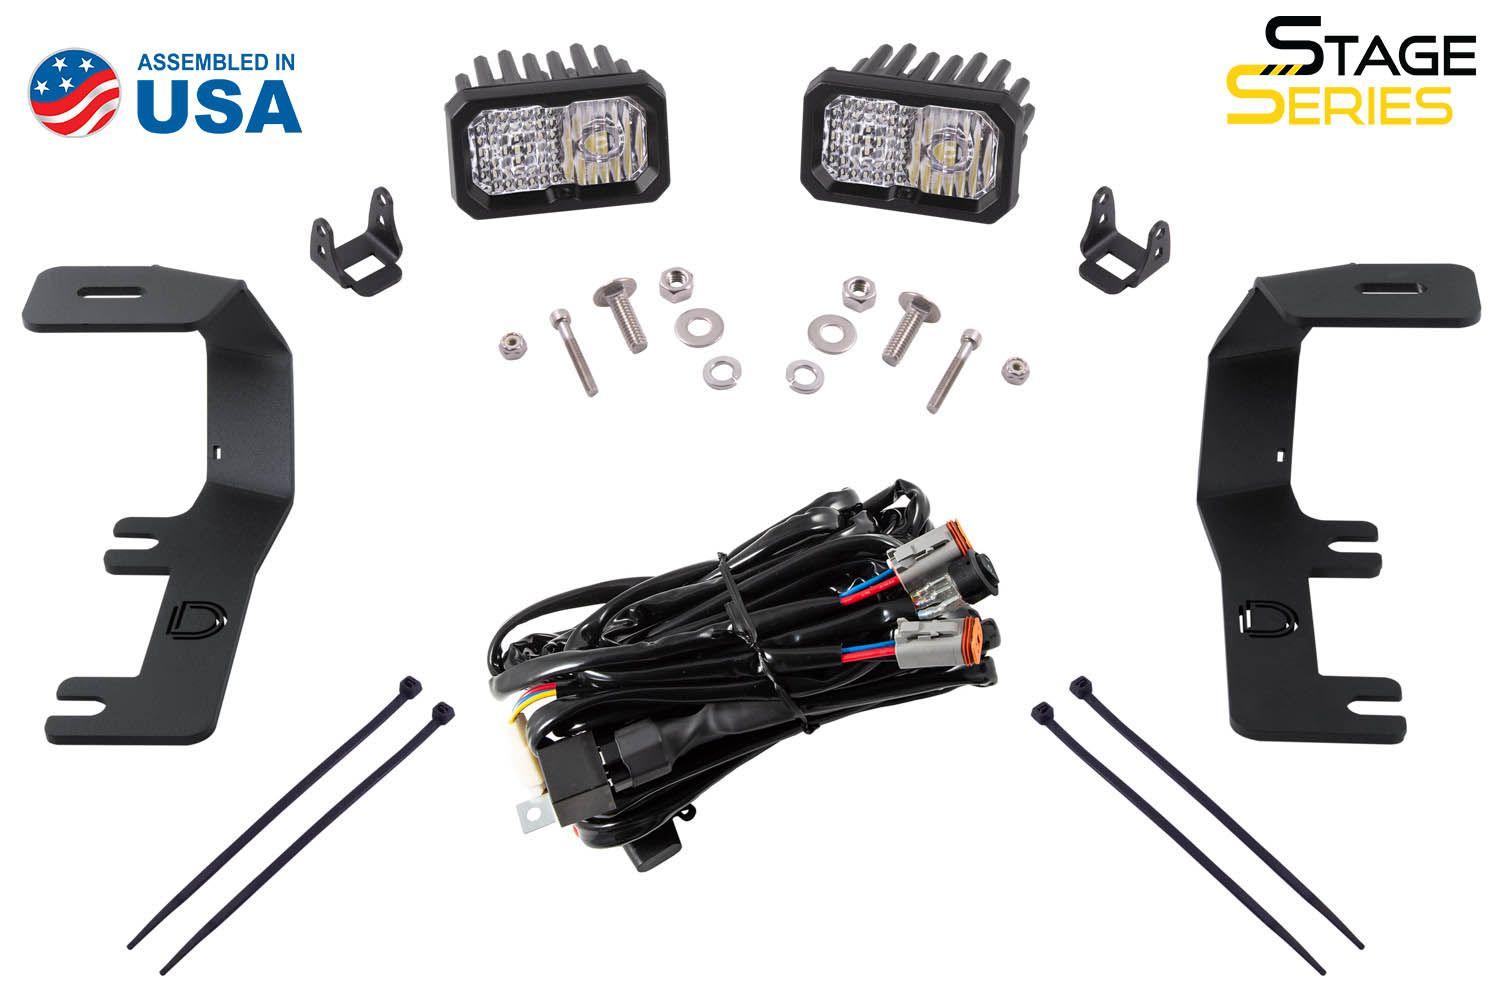 Stage Series Backlit Ditch Light Kit for 2014-2019 Chevrolet Silverado 1500